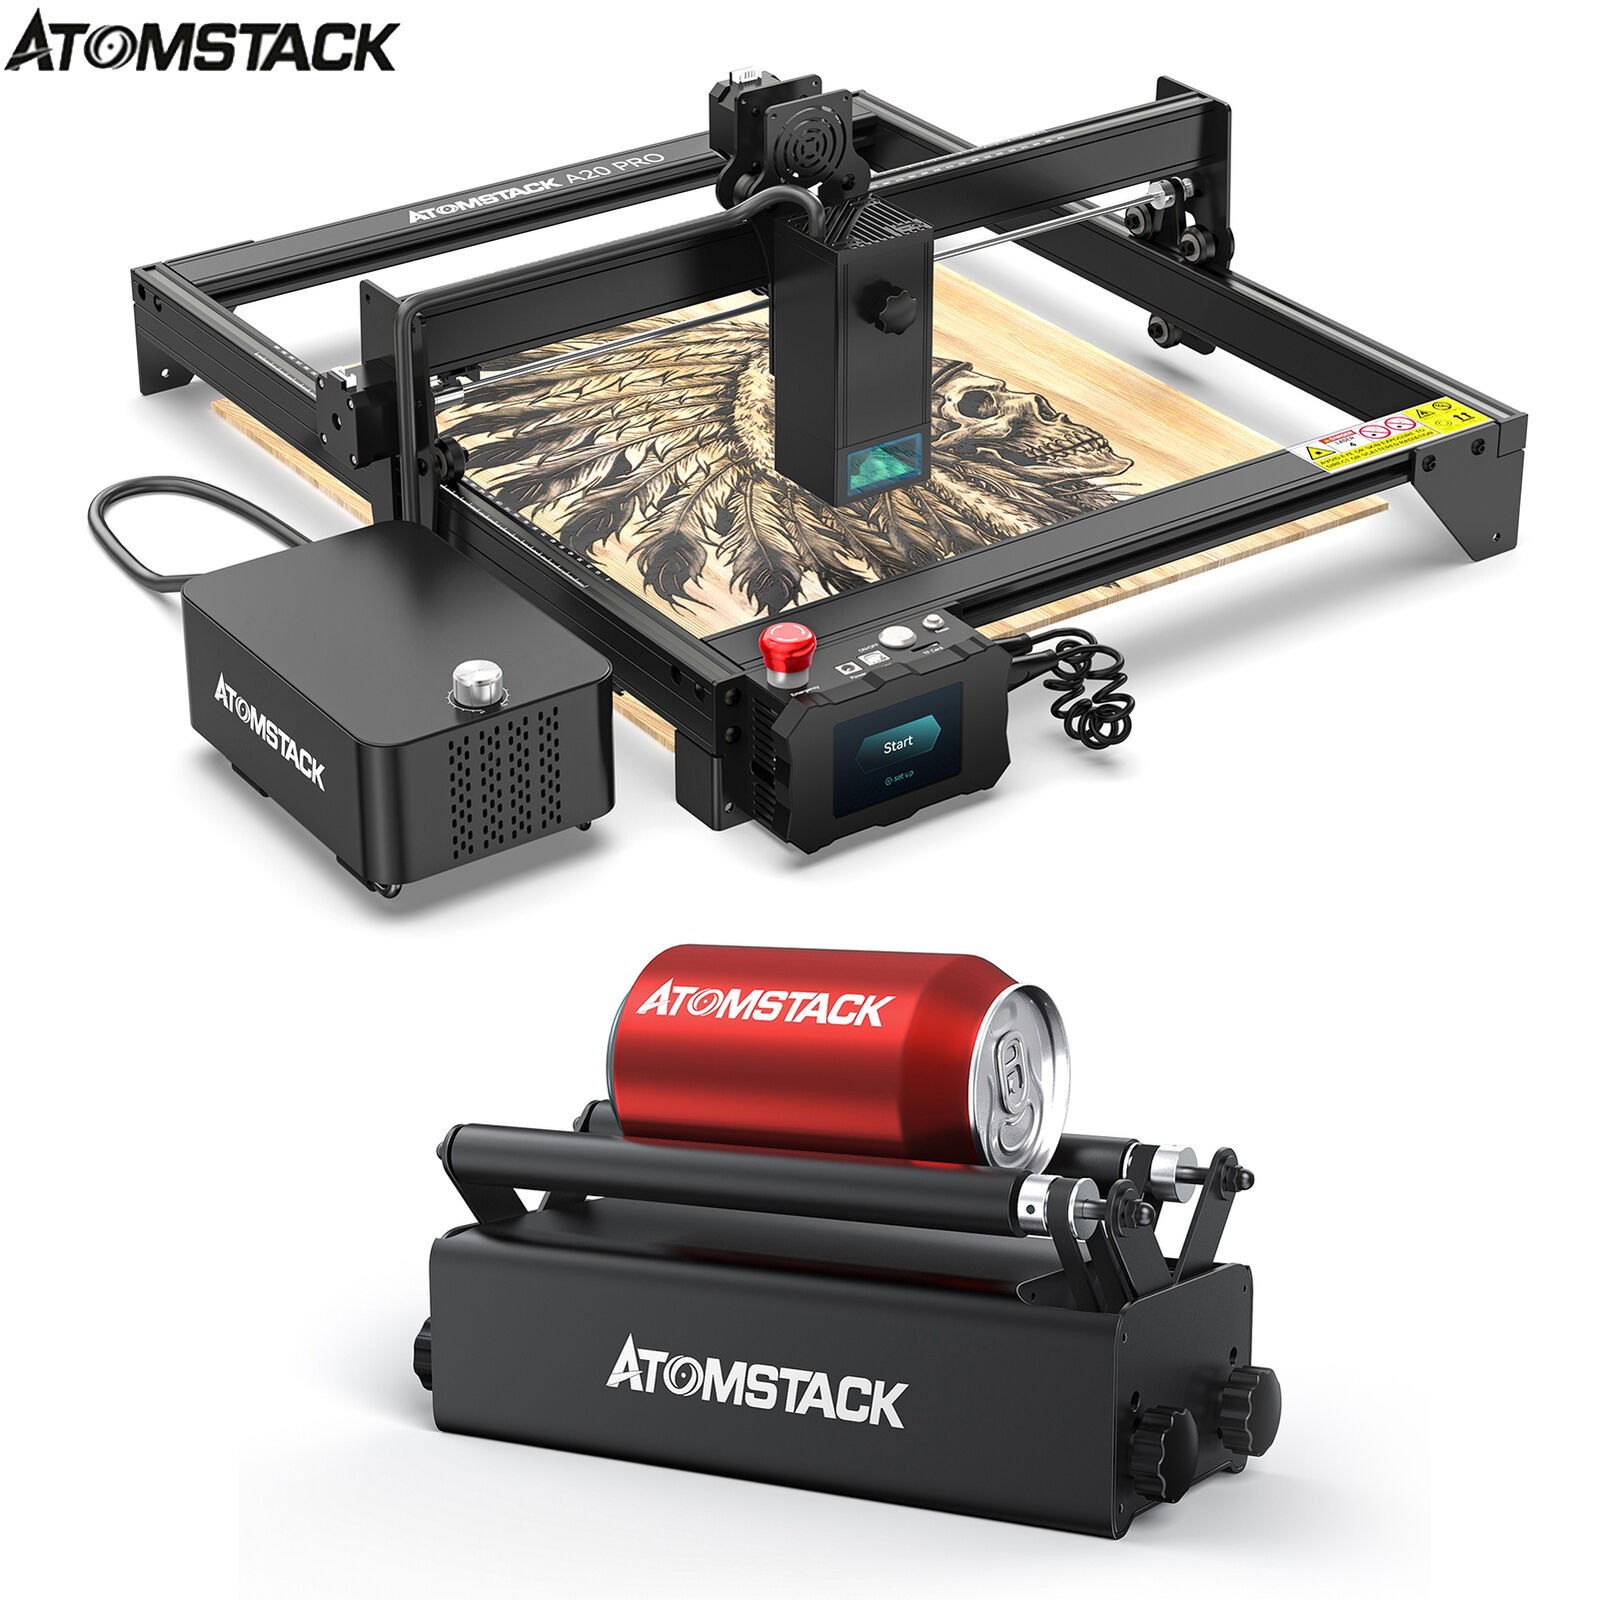 ATOMSTACK A20 Pro 20W Laser Engraver Cutter w/ Air Assist Kit+Rotary Roller S4C8